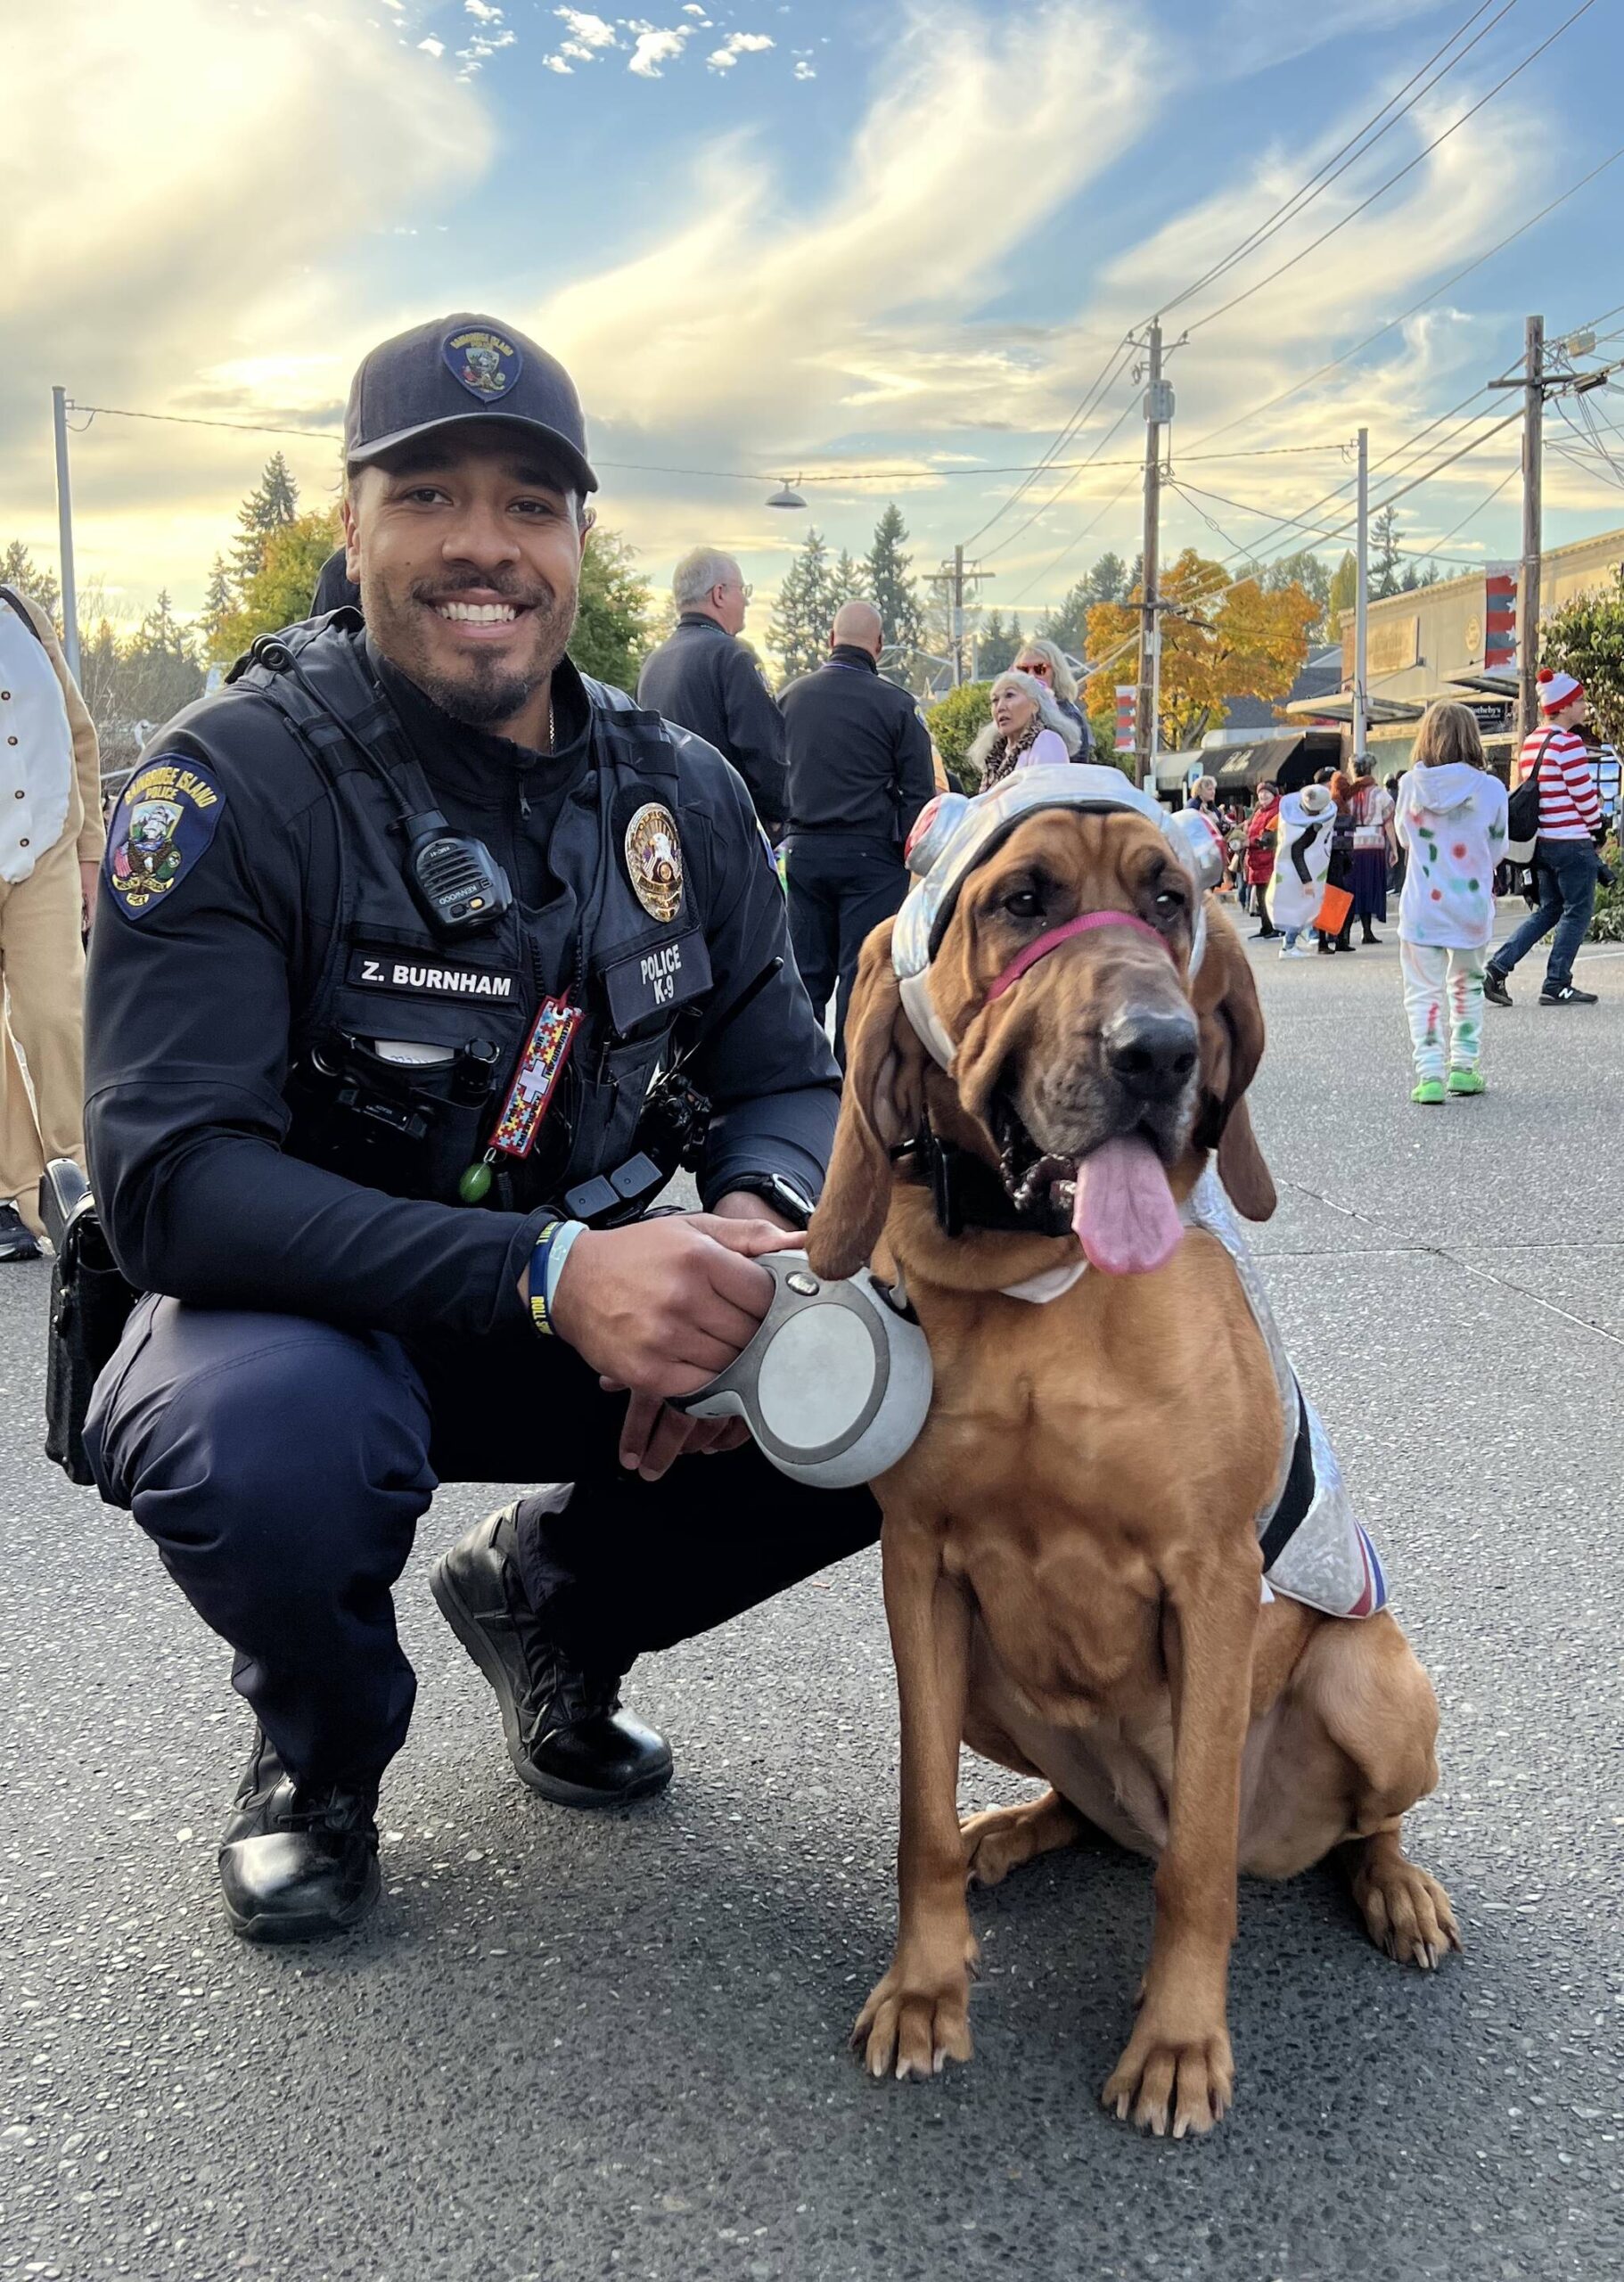 Bainbridge Island police officers Burnham and Whitney dress up for the occasion.